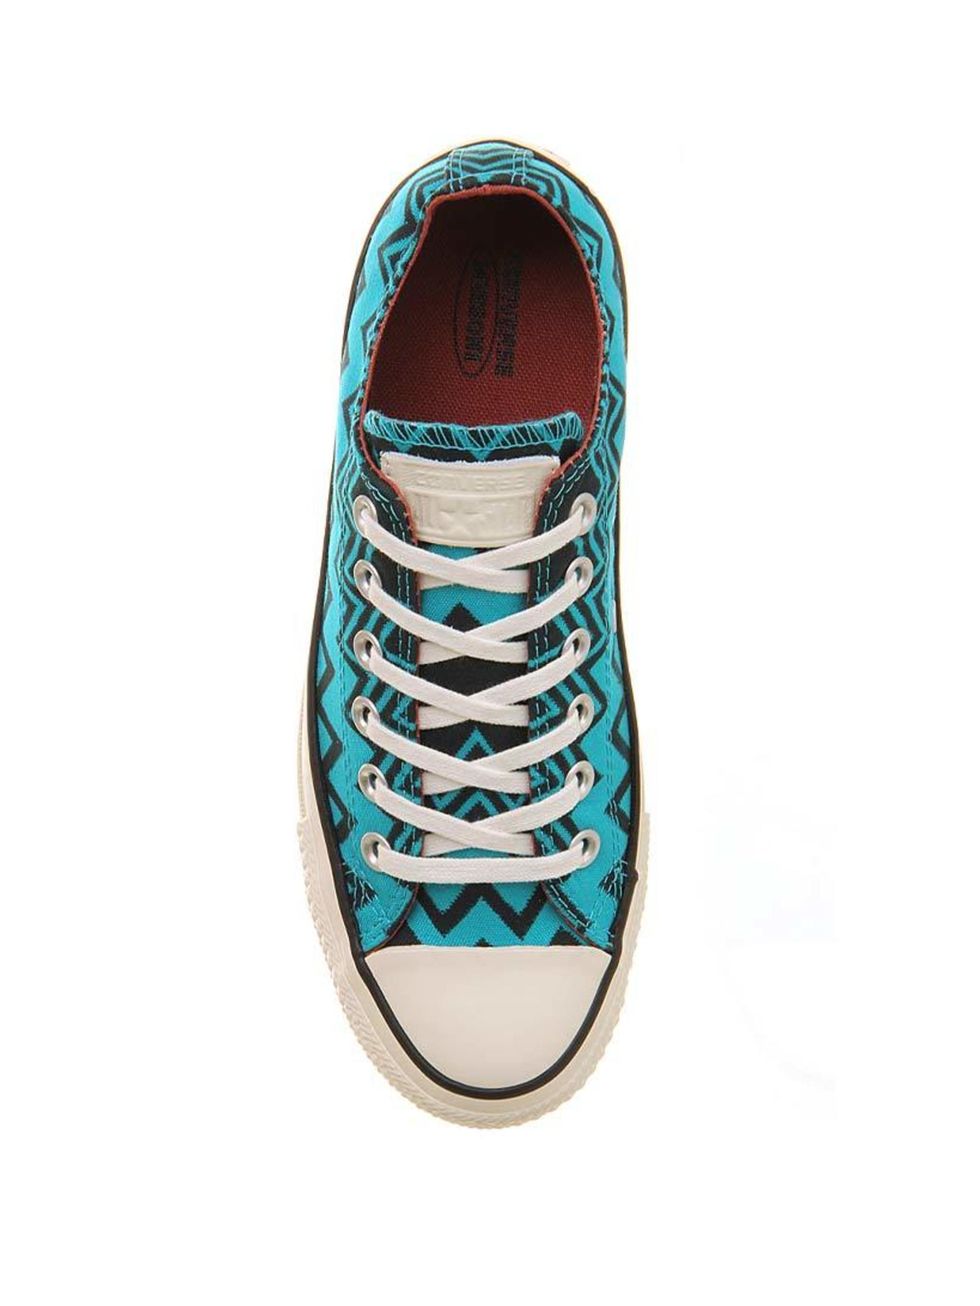 <p>Everyday classics reincarnated in fabulous Missoni prints. </p>

<p> </p>

<p>Converse x Missoni trainers, £69.99 at <a href="http://www.office.co.uk/view/product/office_catalog/5,20/2413192814" target="_blank">Office</a></p>